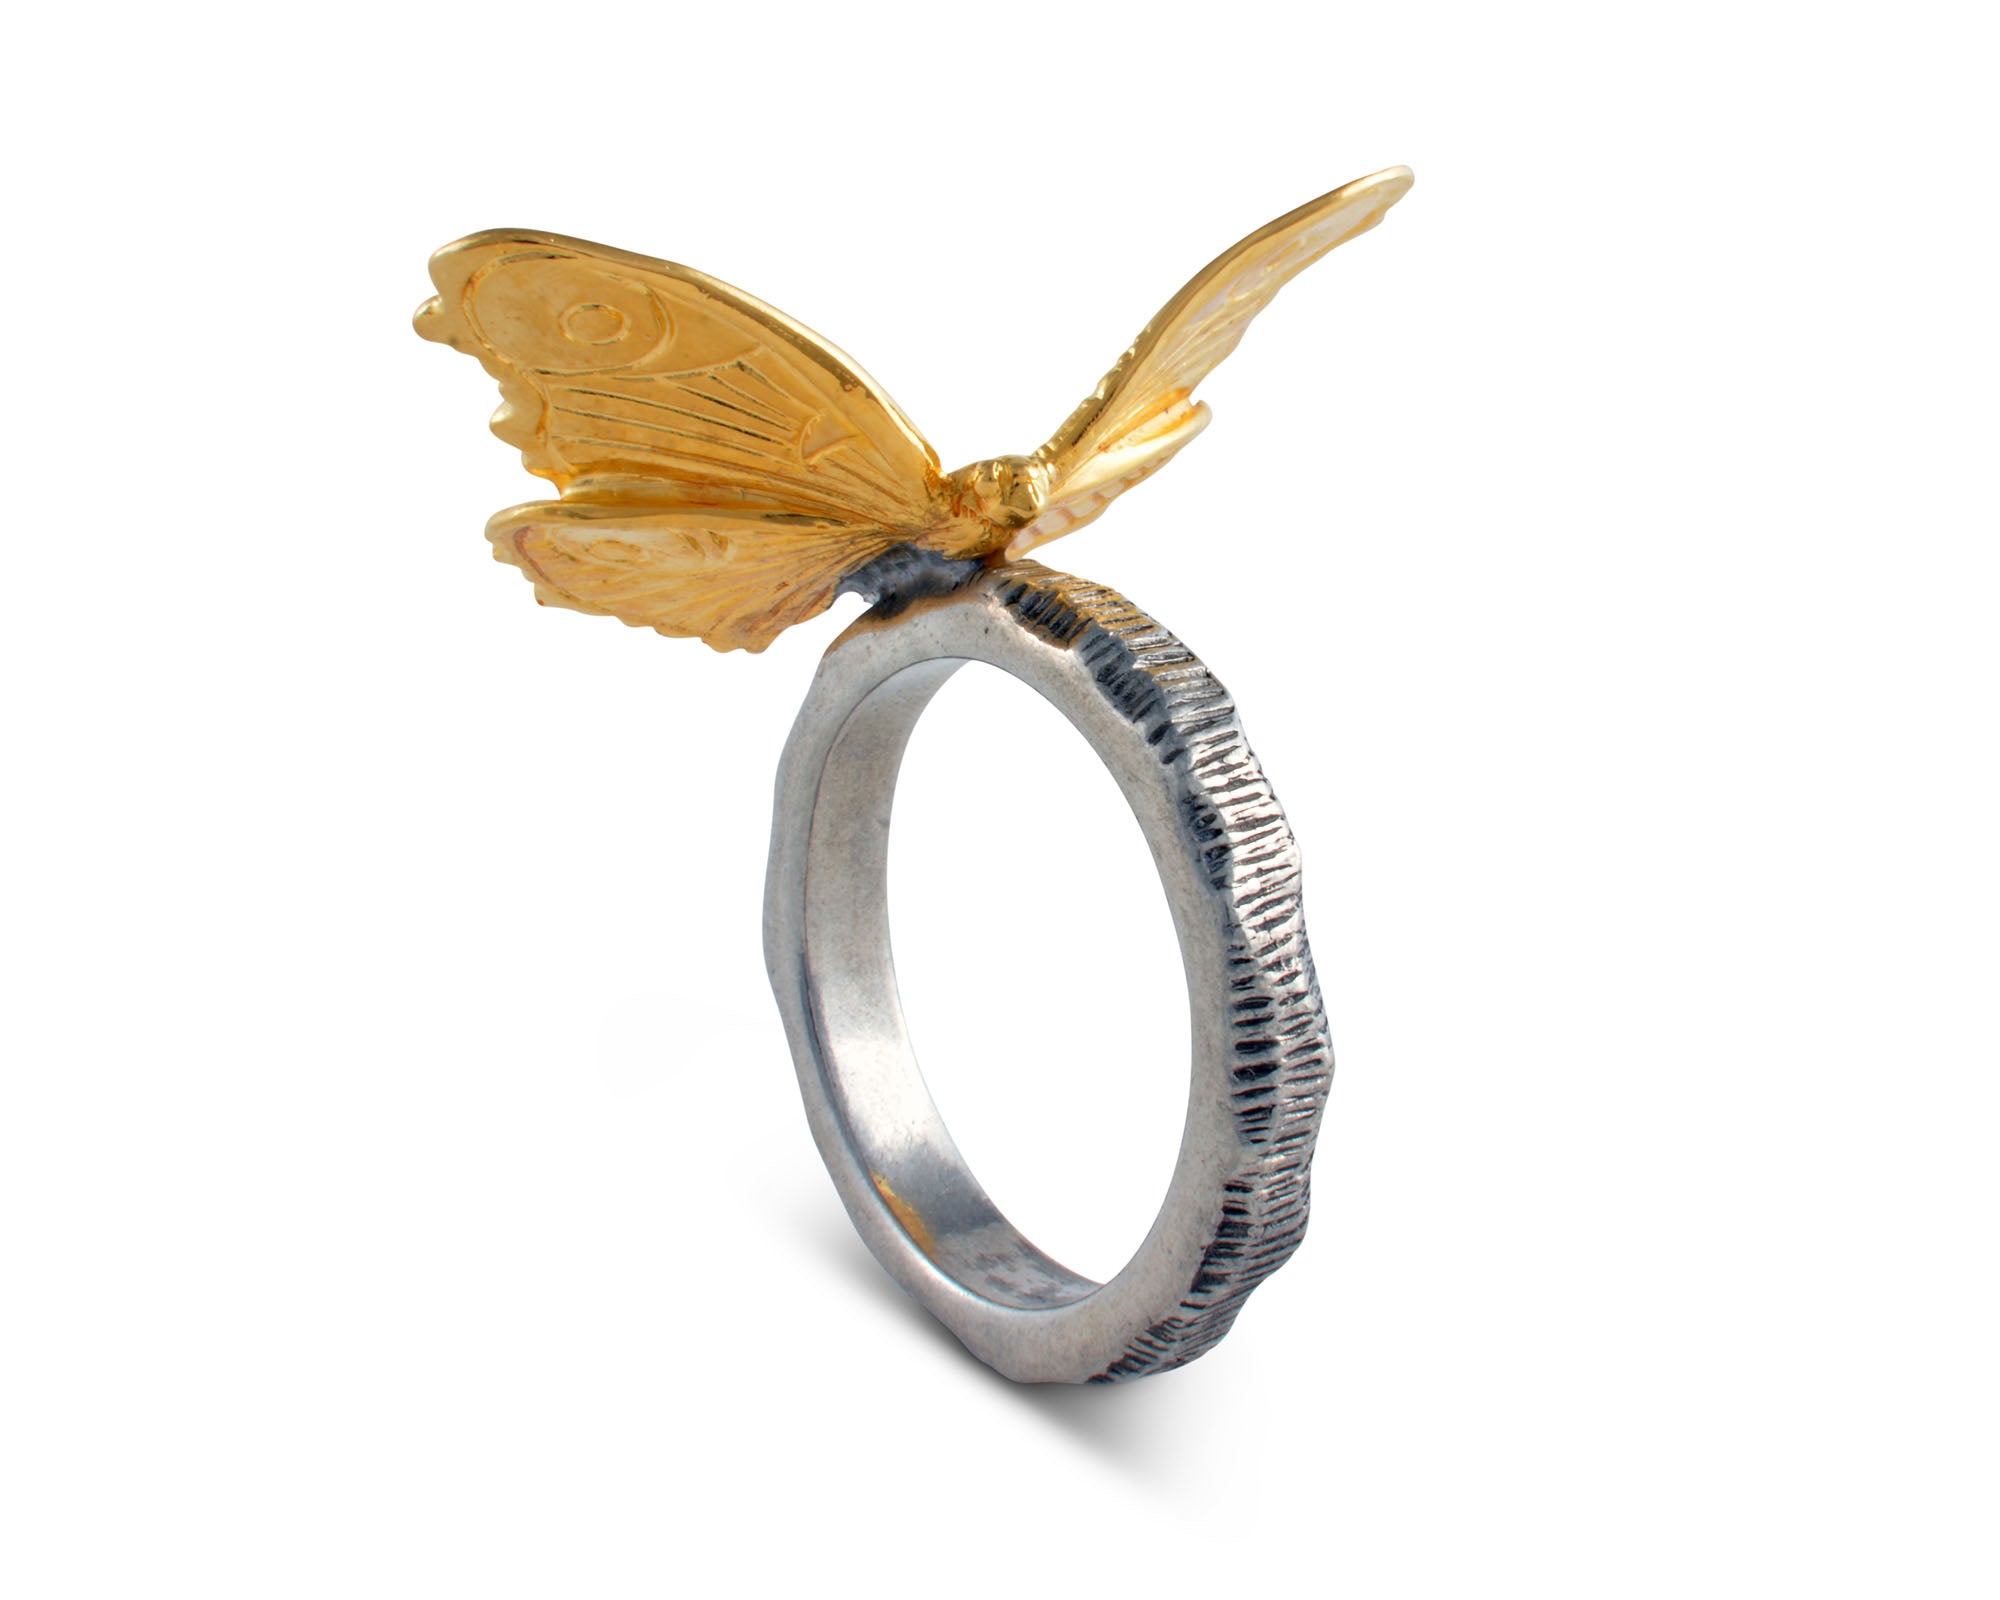 Vagabond House Gold Butterfly Napkin Ring Product Image